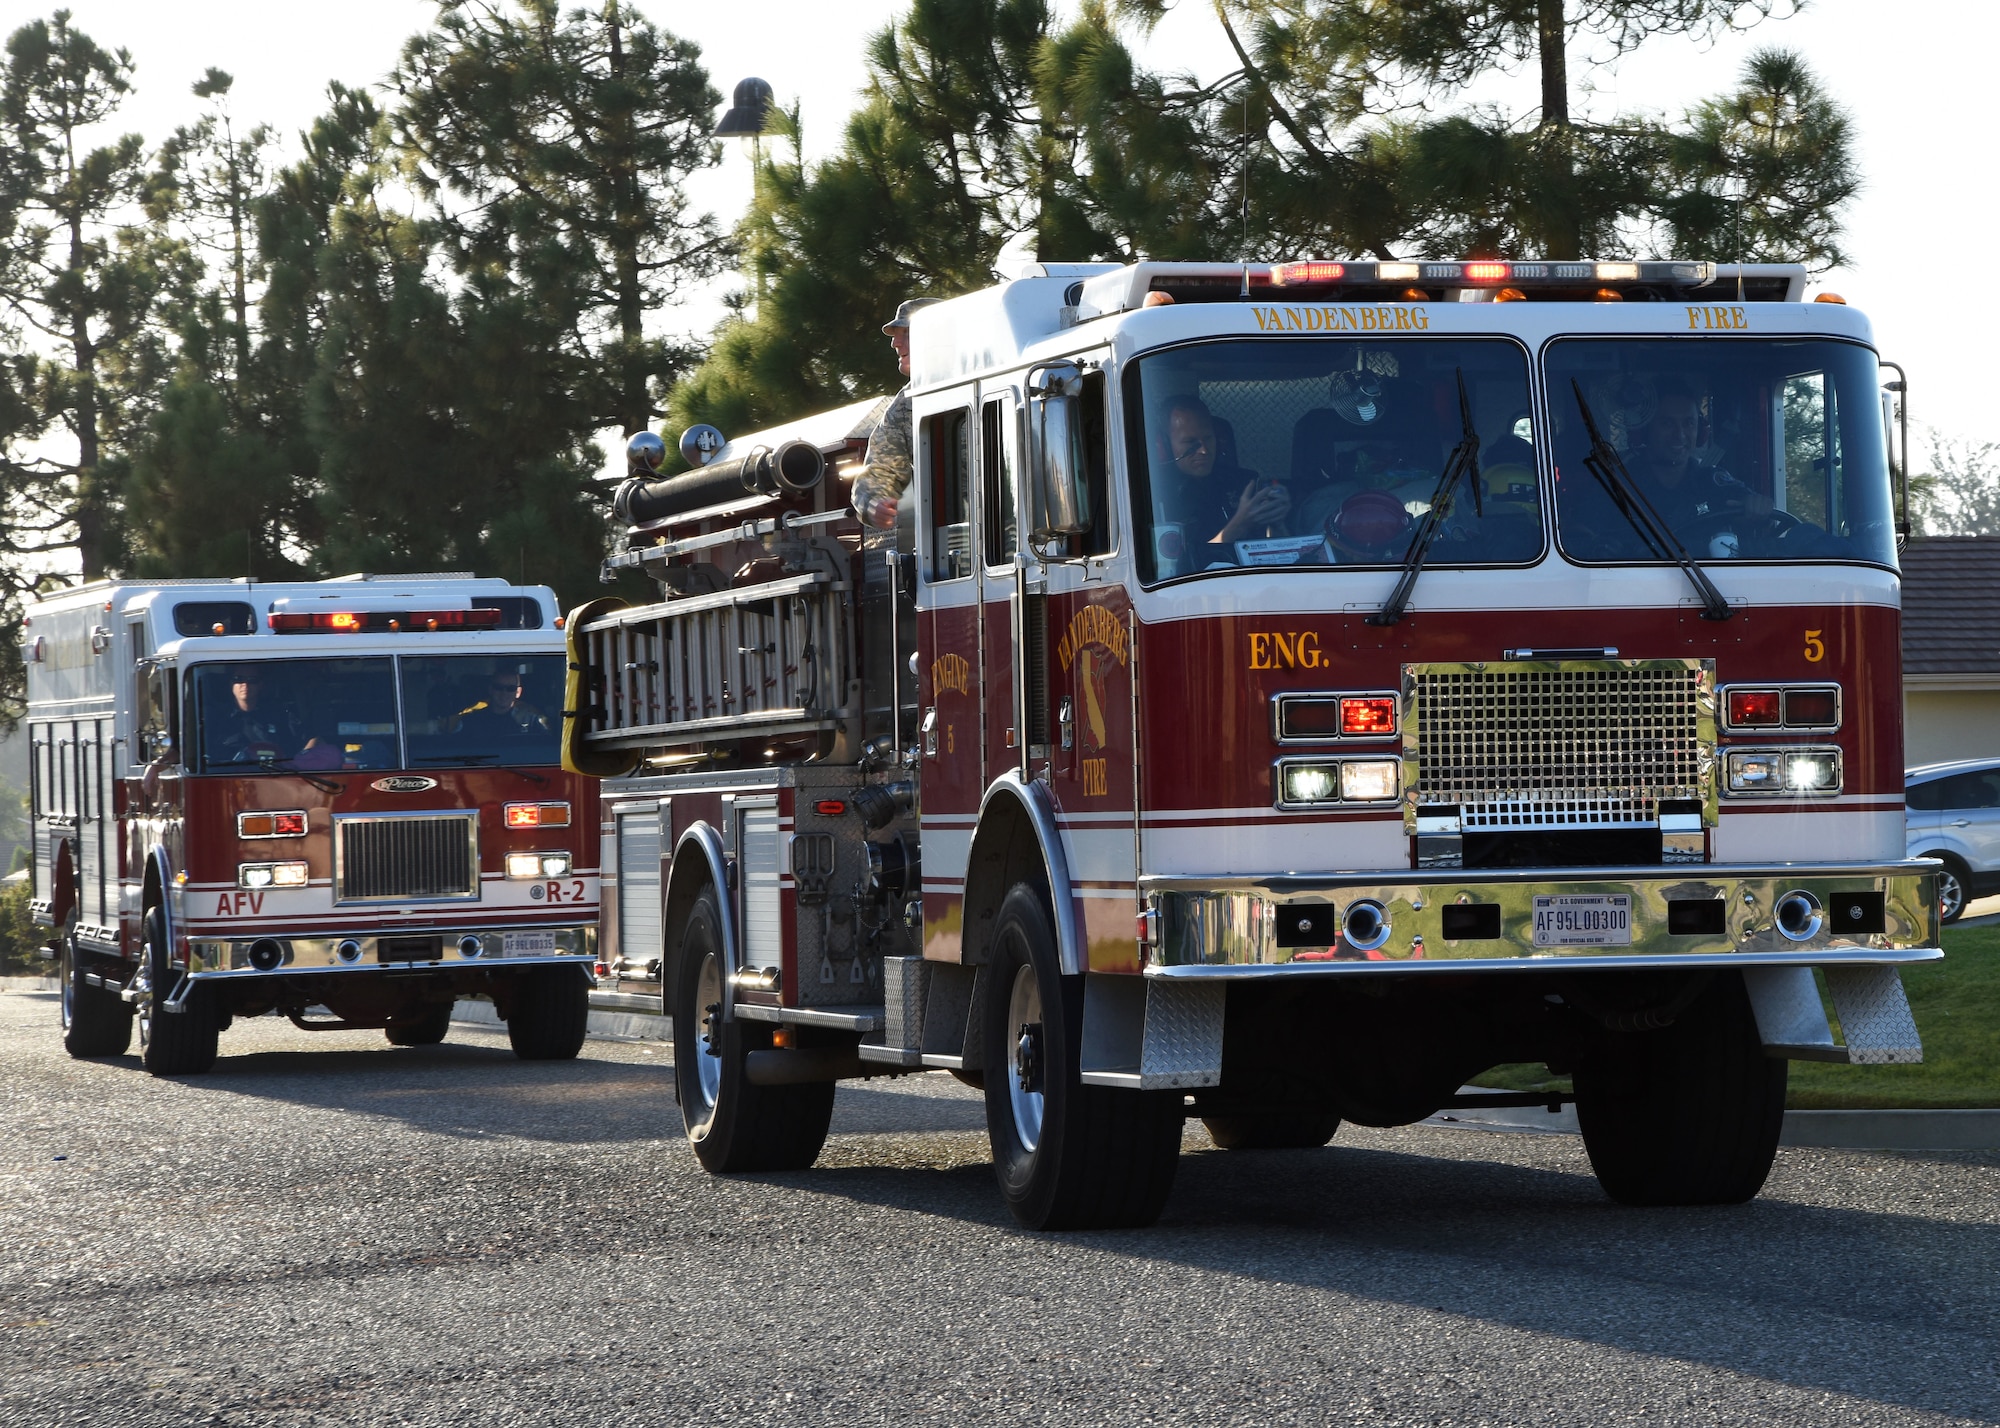 Fire trucks drive by Oct. 13, 2017, on Vandenberg Air Force Base, Calif. The drive was part of Fire Prevention Week.